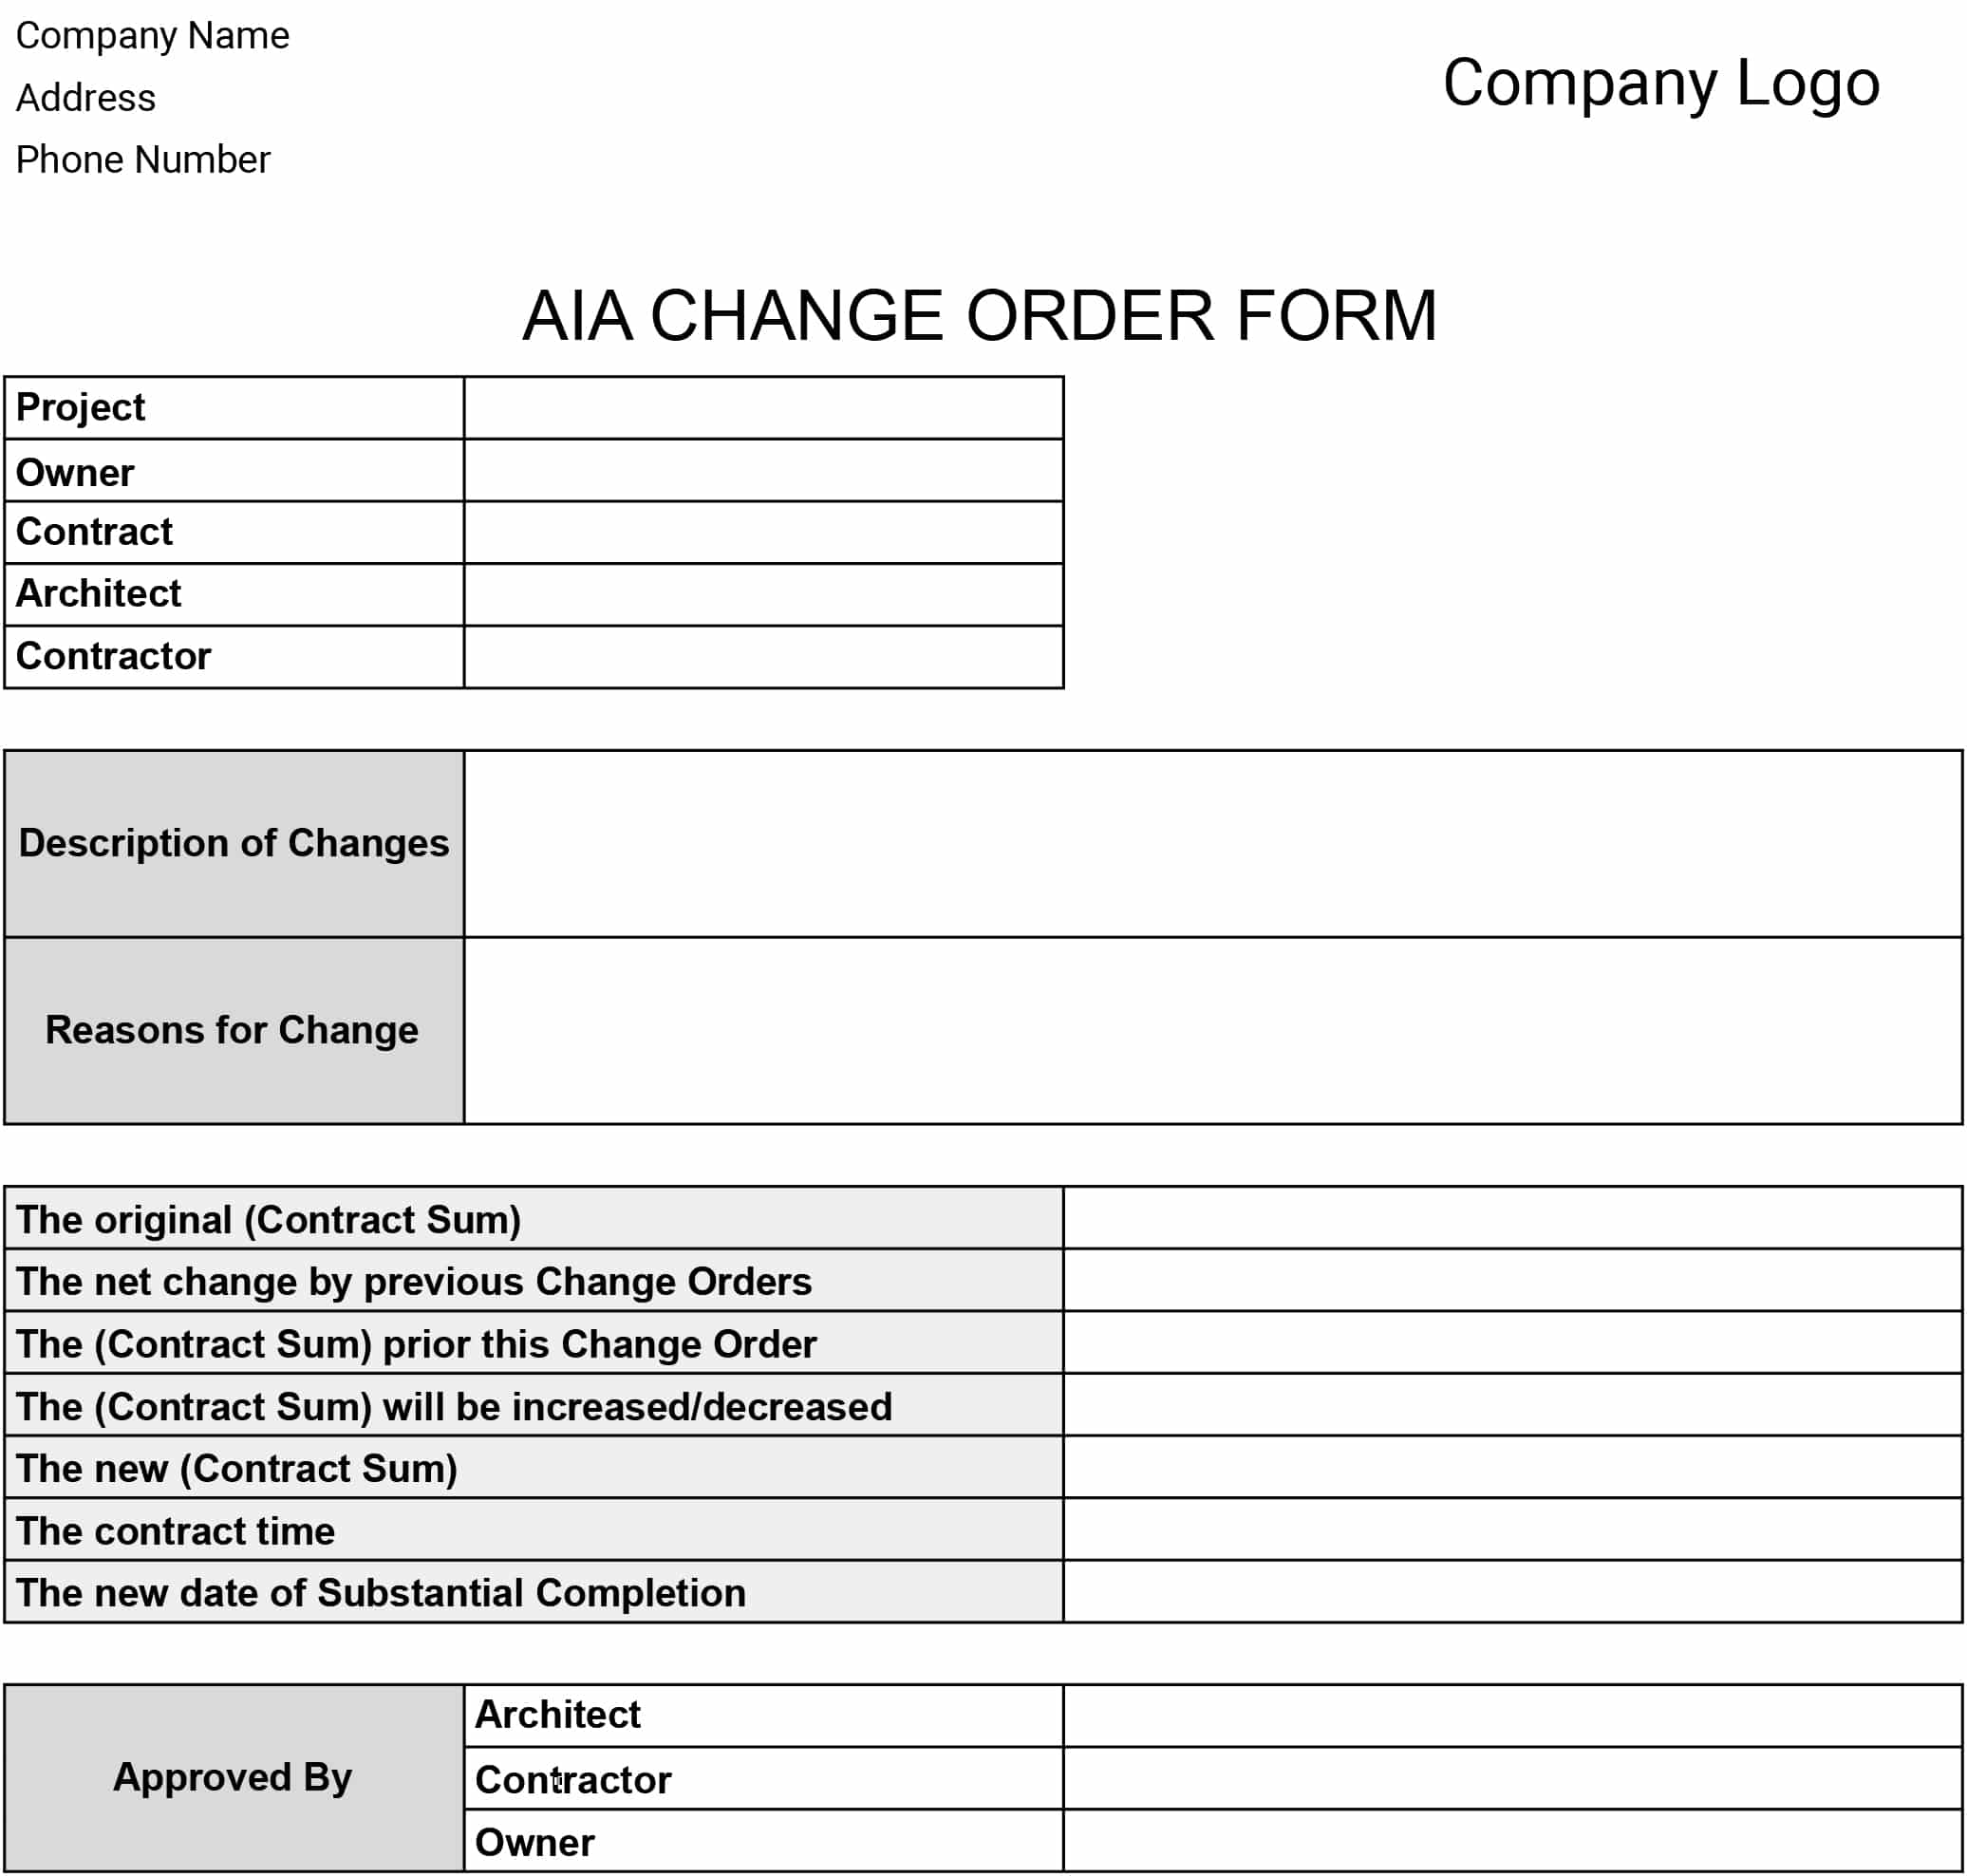 AIA Change Order Form